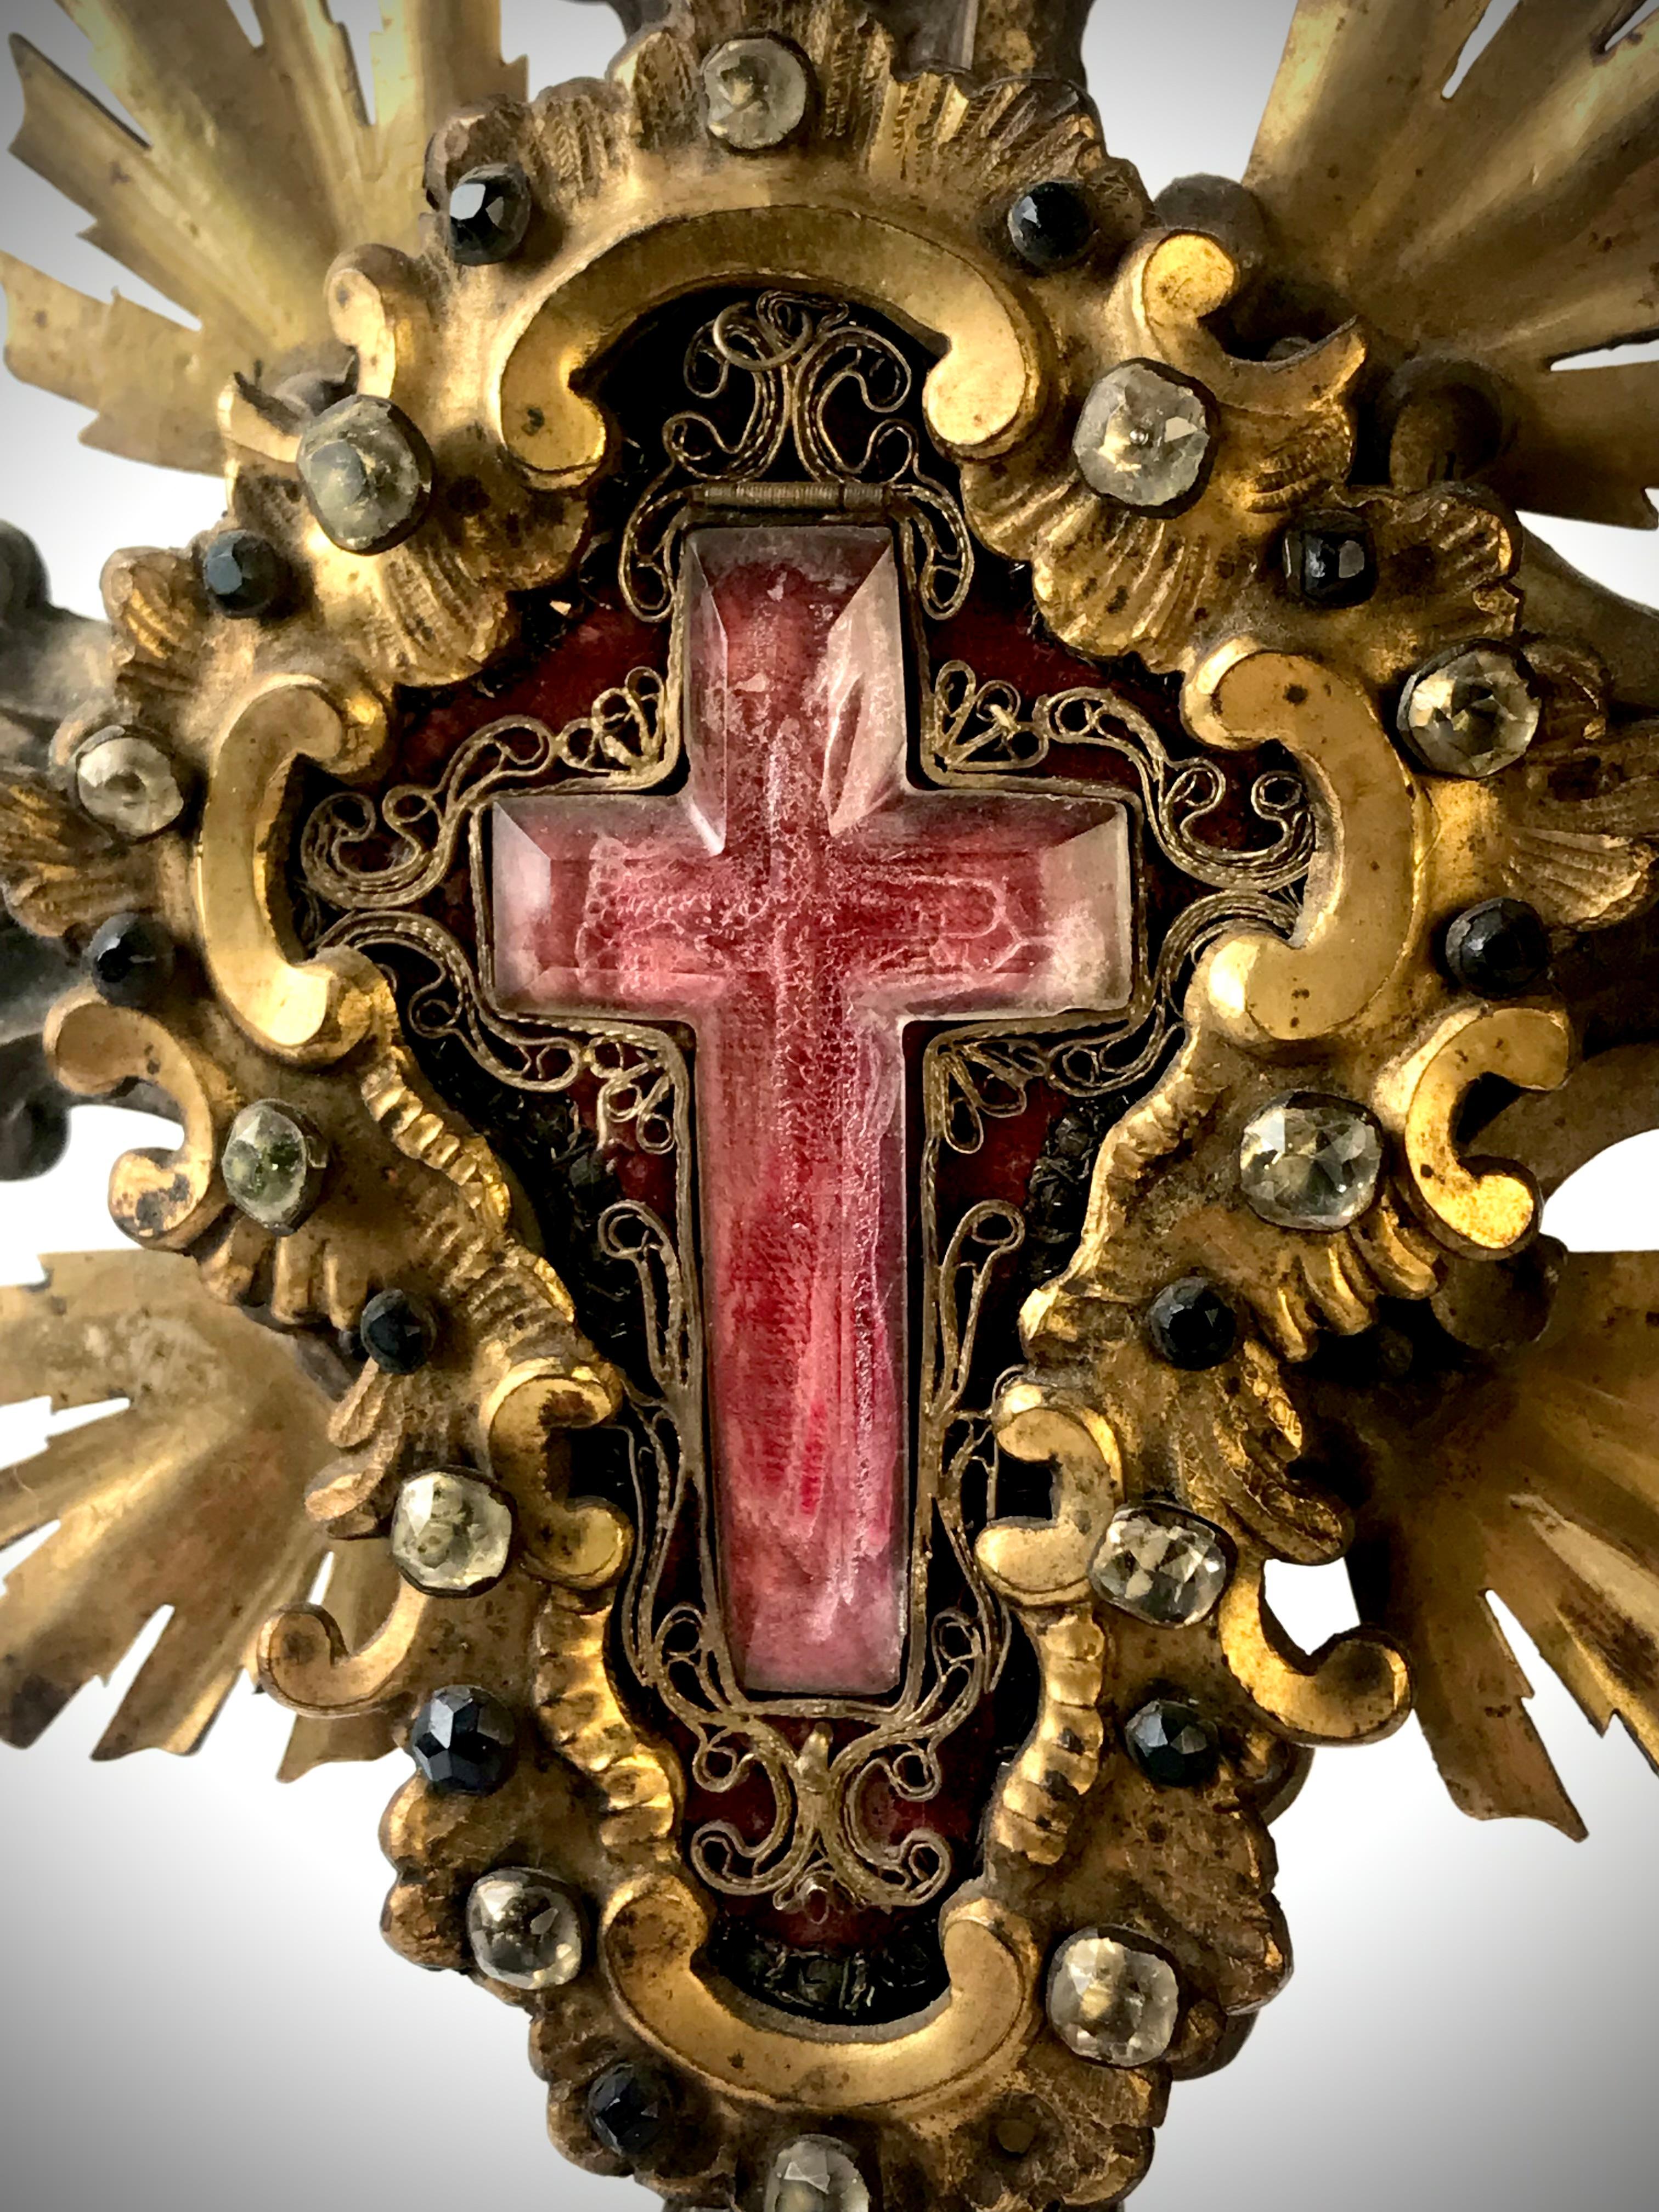 A magnificent 18th Century Baroque Gilded bronze Cross, with a rock crystal true cross relic.

Italian, circa 1780
Embellished with semi precious stones and further silver and gold gilding.Also gold thread scroll around the rock crystal cross.

A